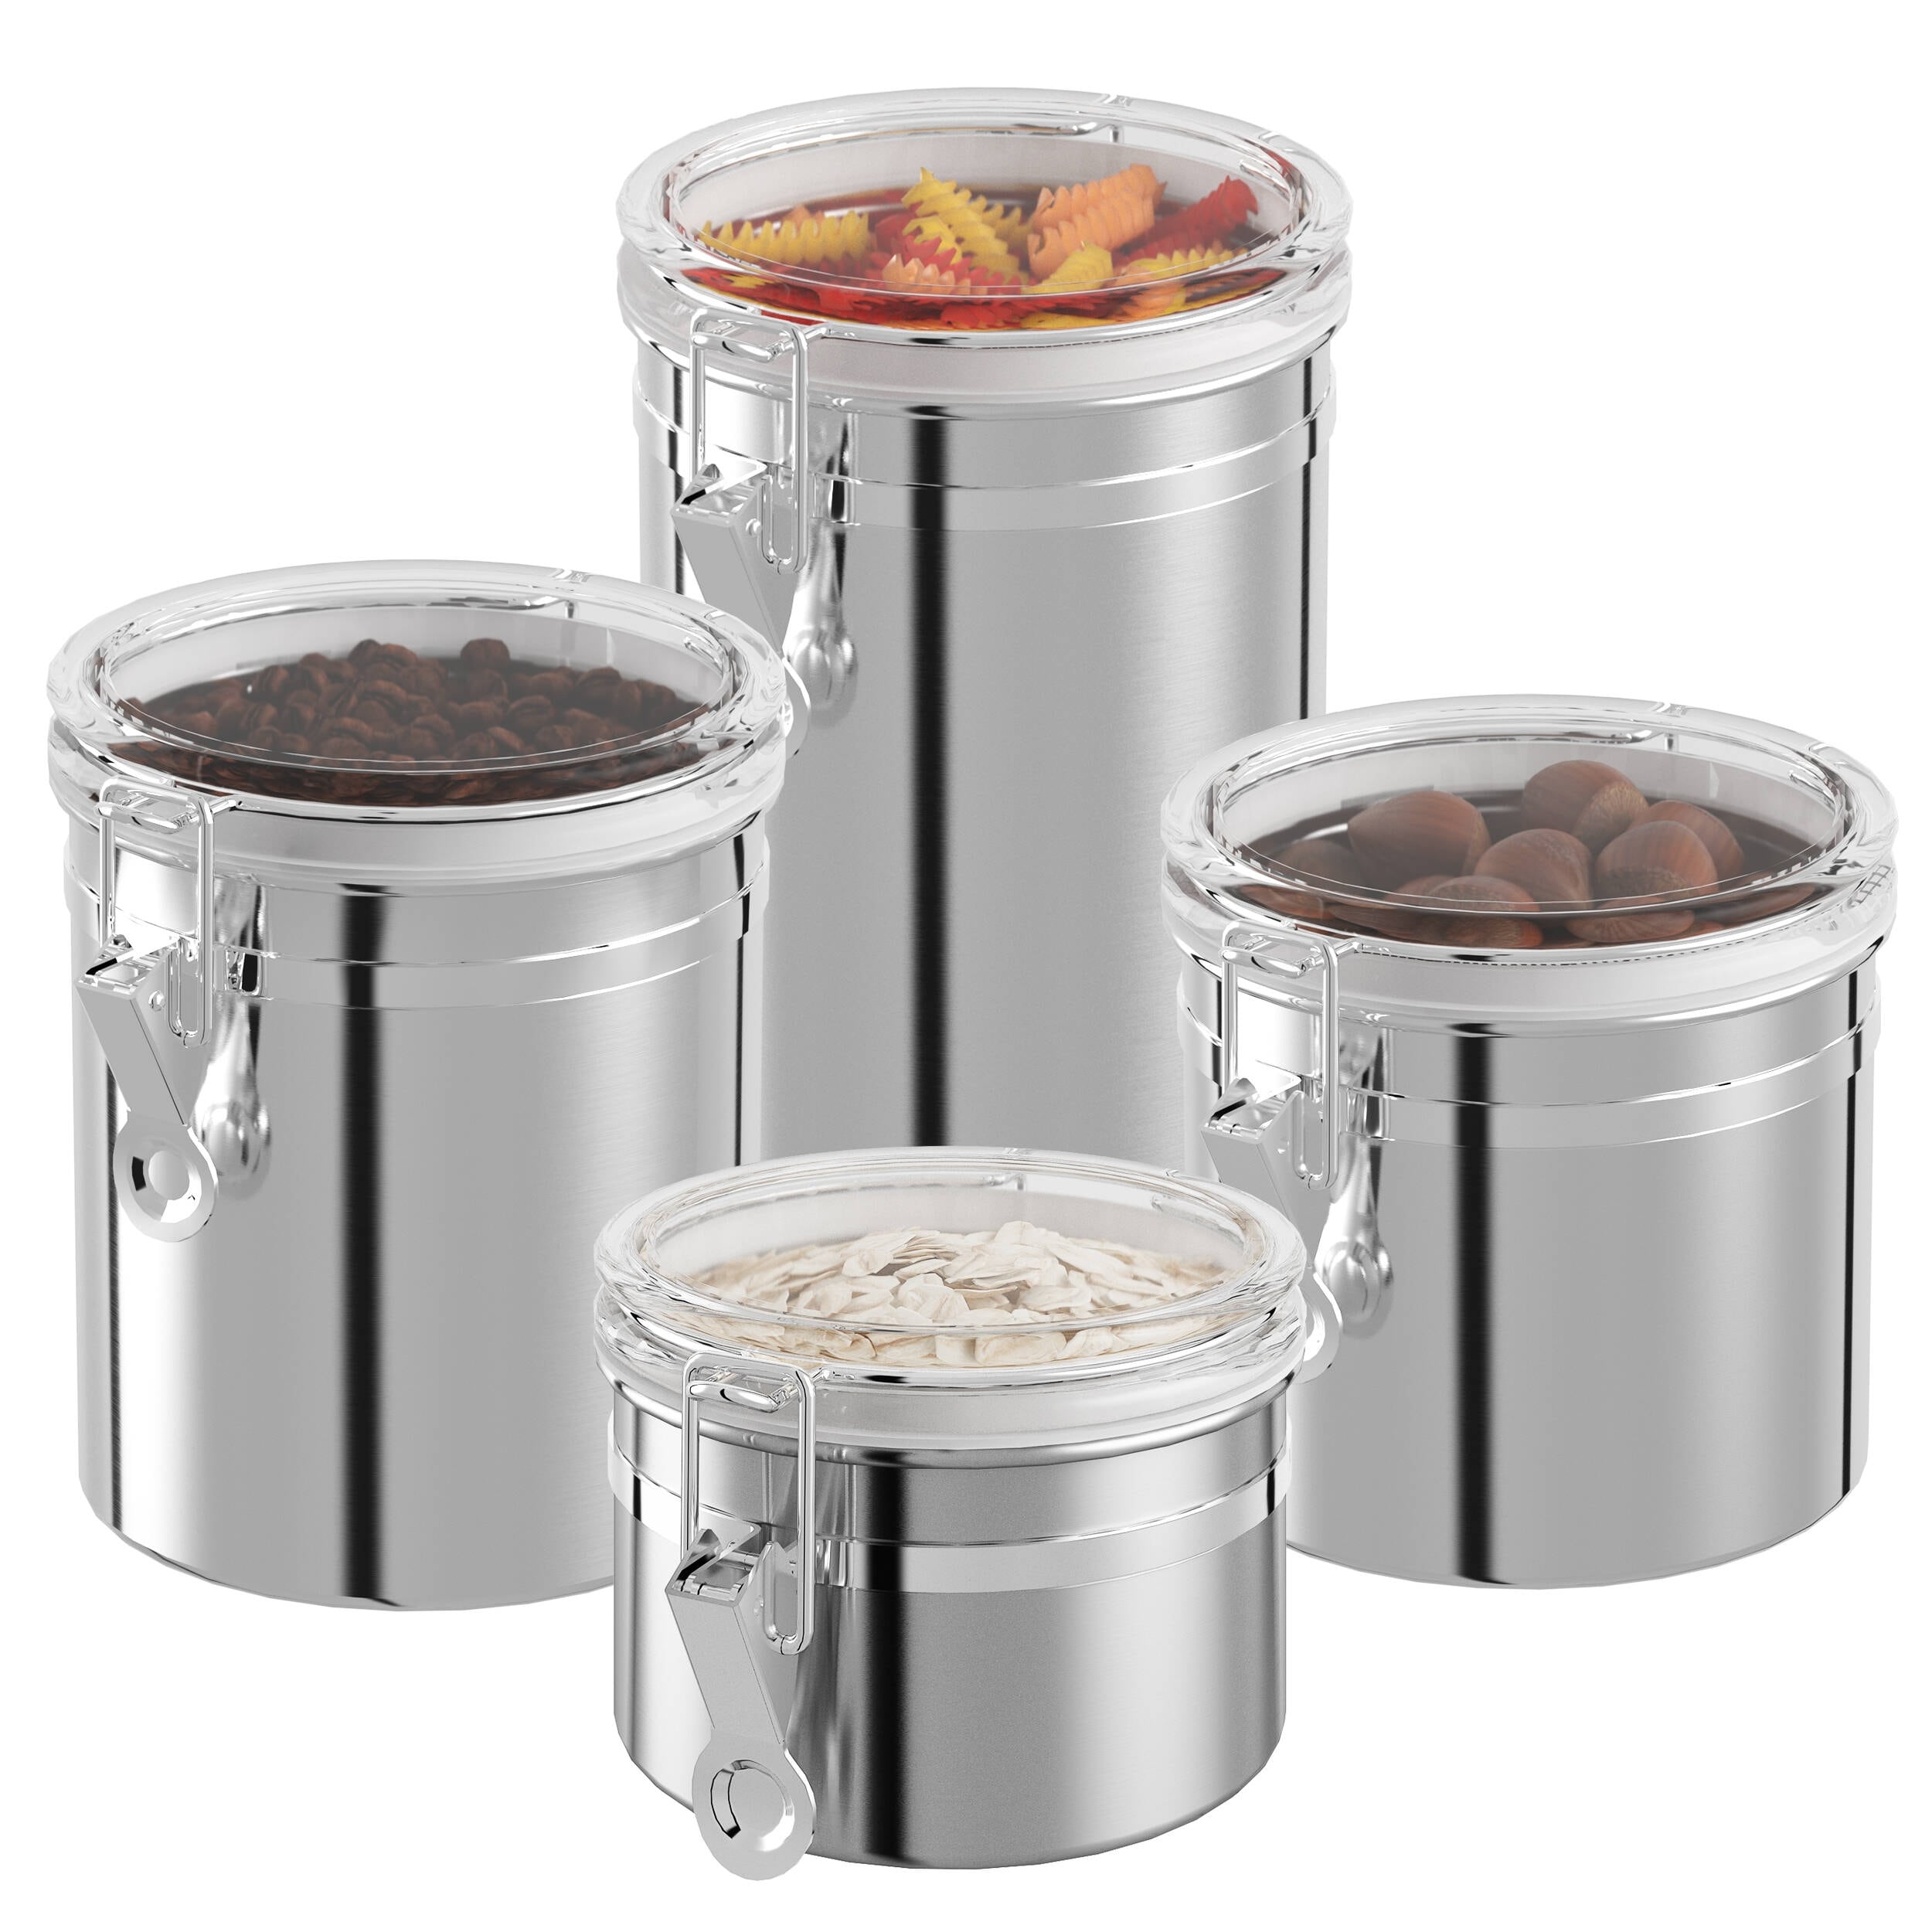 https://ak1.ostkcdn.com/images/products/is/images/direct/b001ad2bad048d38b07273651eb84feae6d6de3d/Innovaze-Stainless-Steel-Containers-Set-of-4.jpg